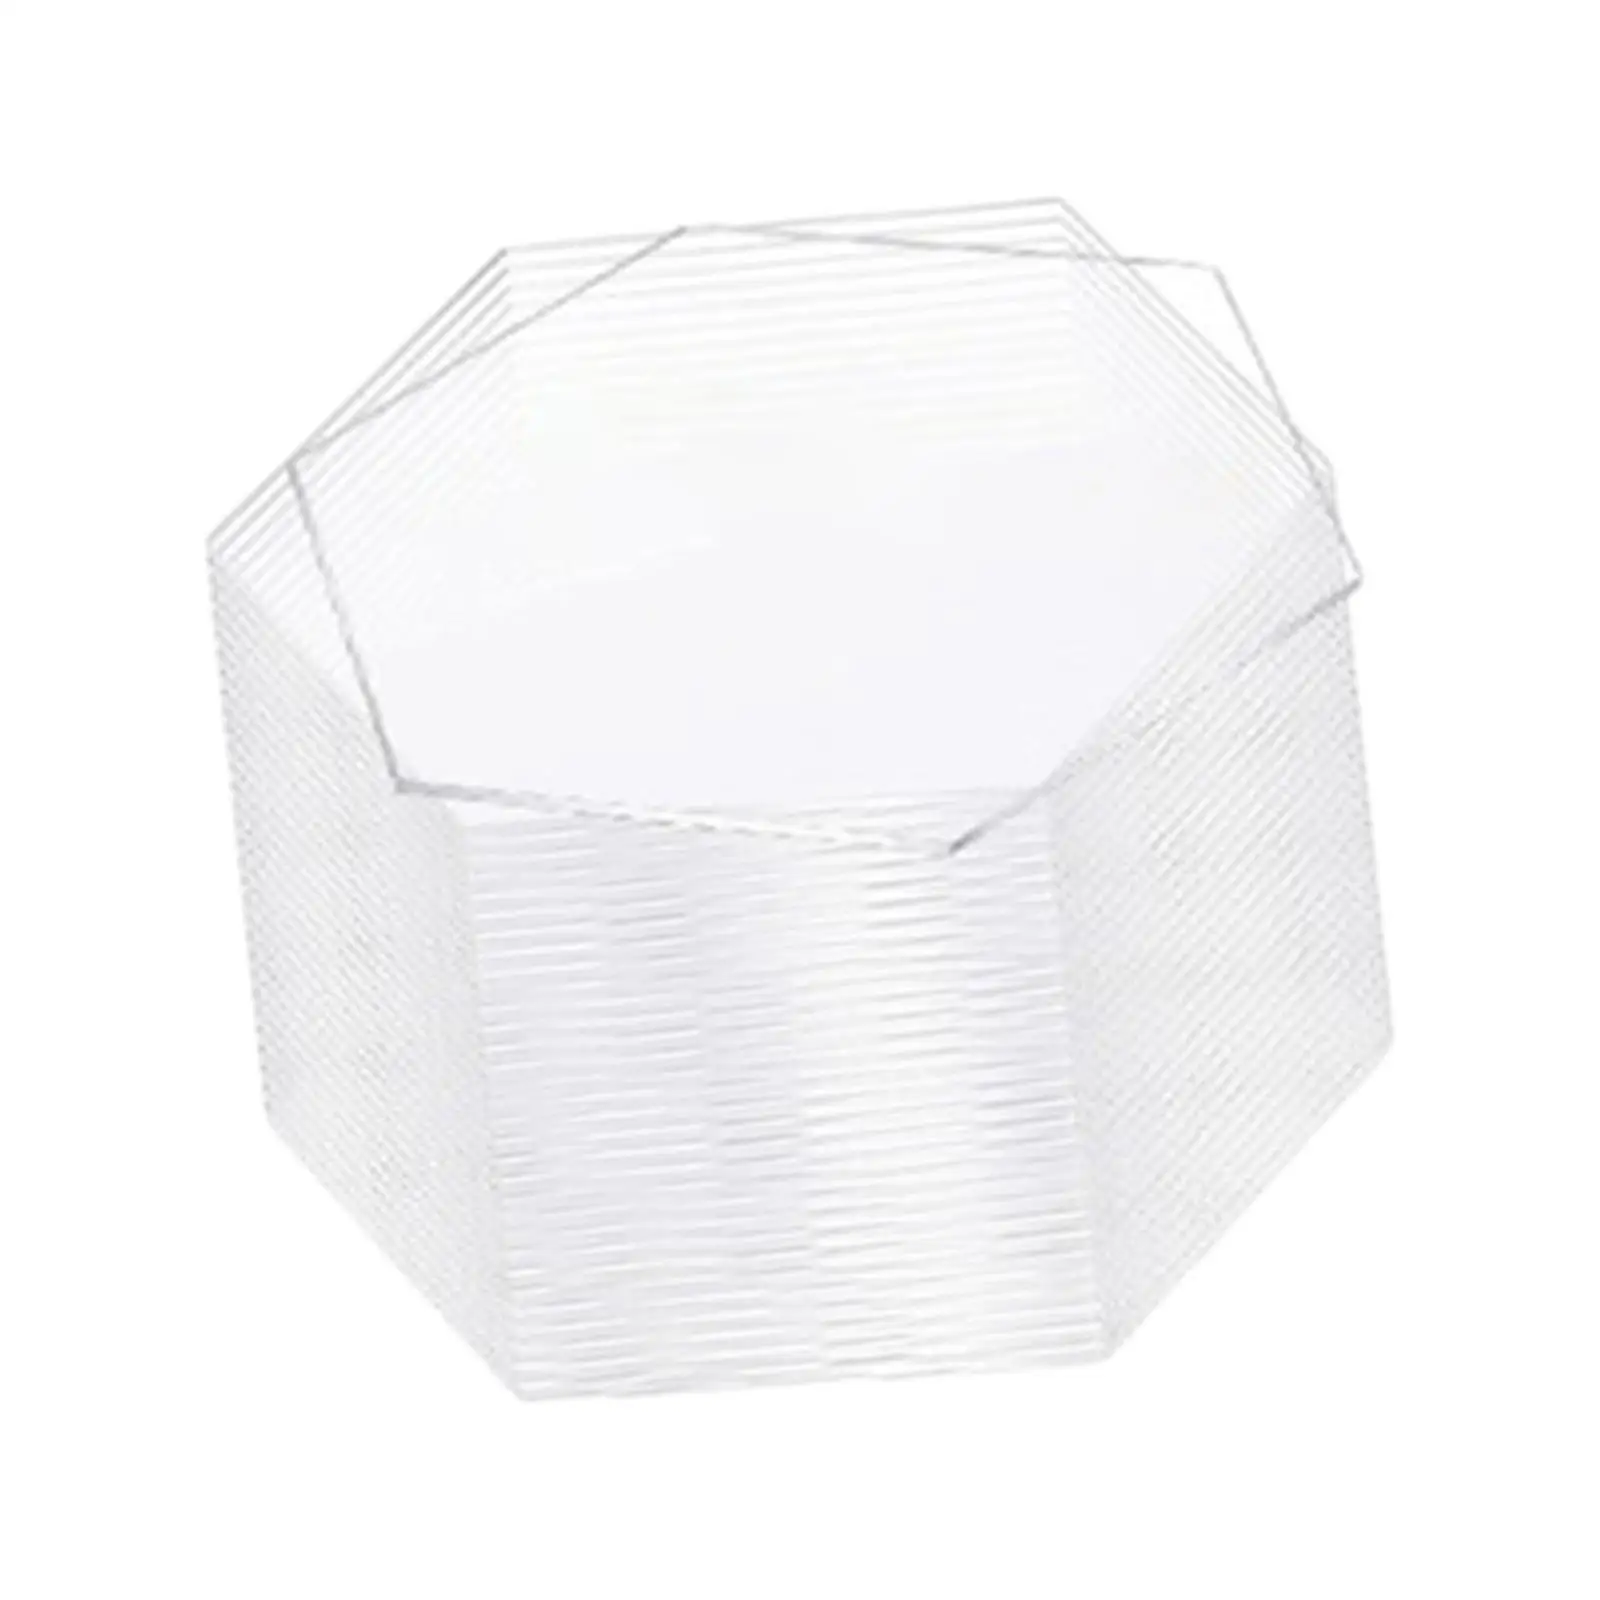 40 Pieces Clear Acrylic Place Cards Reusable Hexagon Table Number Cards for Special Event Dinner Tea Party Birthday Restaurant